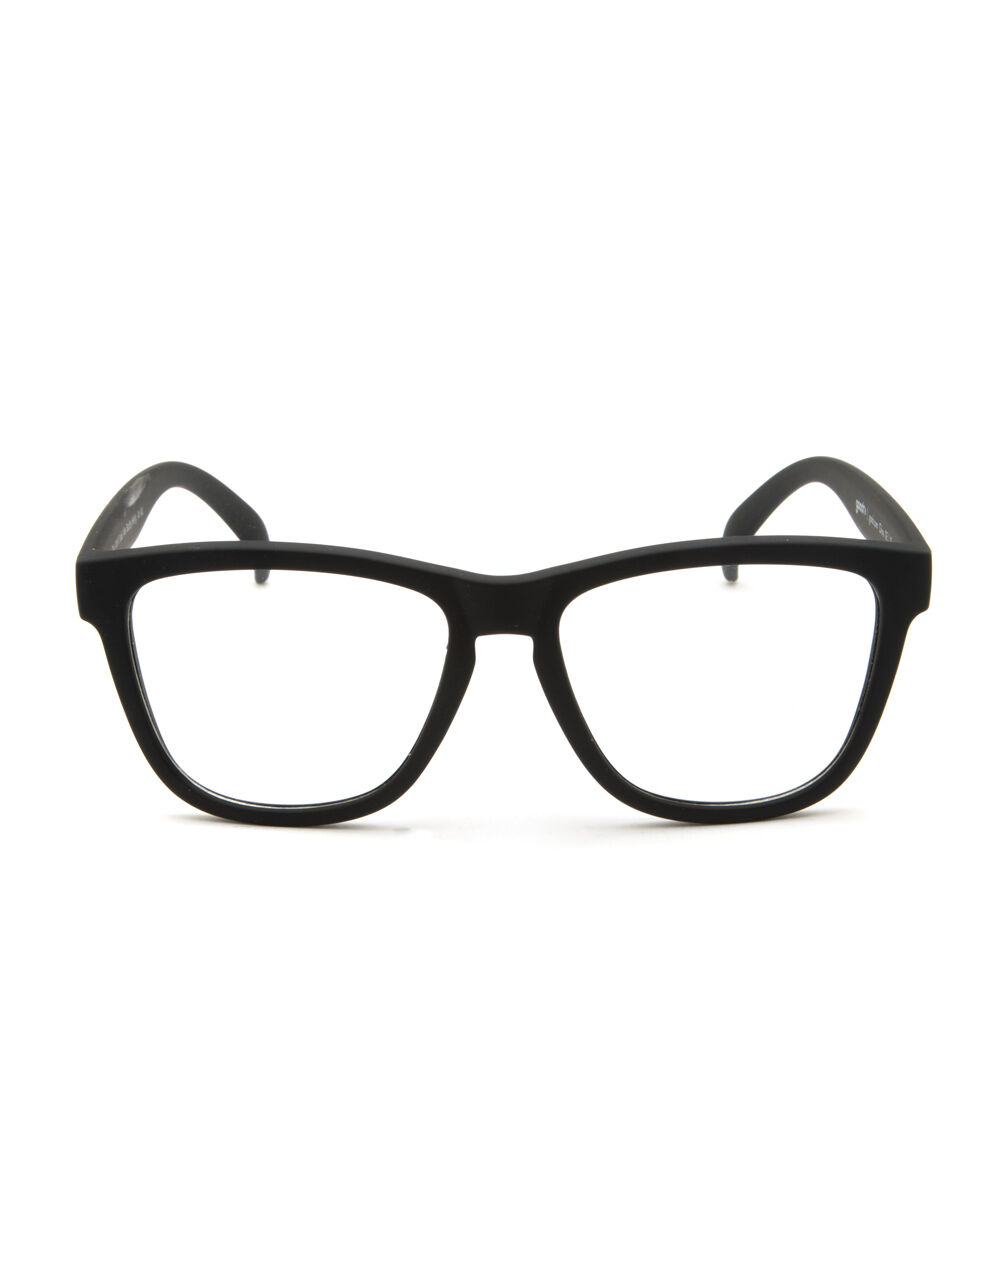 GOODR The OGs You Don't Look Like Buddy Holly Reading Glasses - BLACK ...